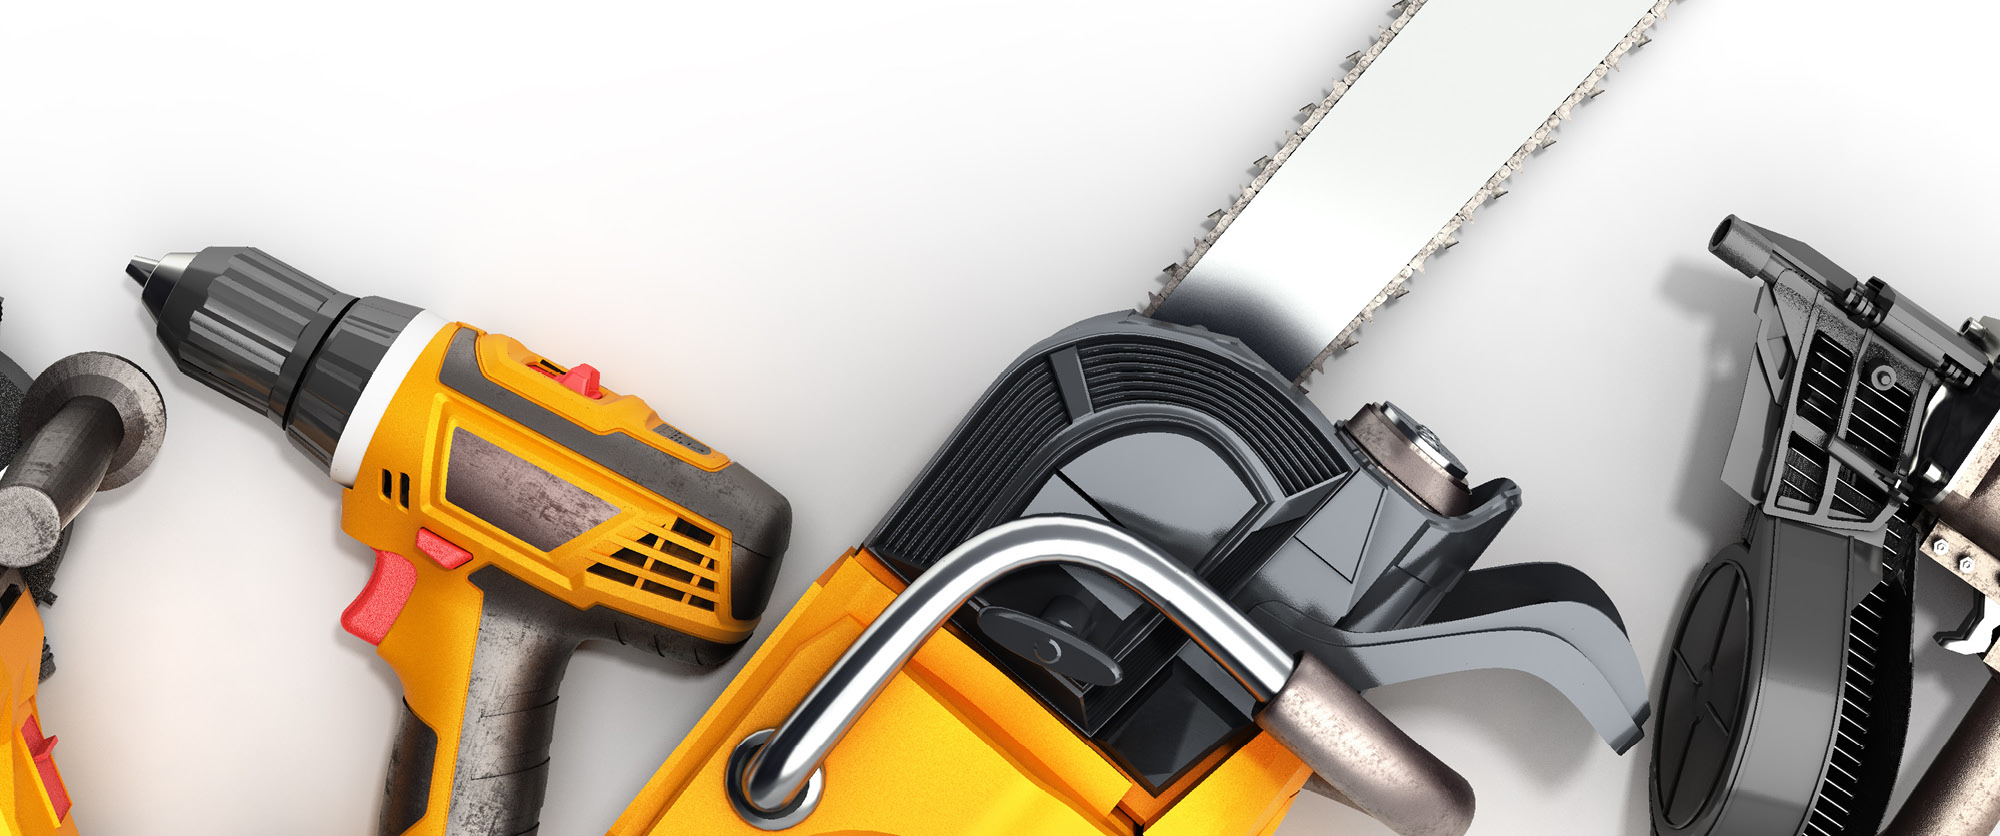 Power Tool Accessories Market Report Opportunities, and Forecast By 2033